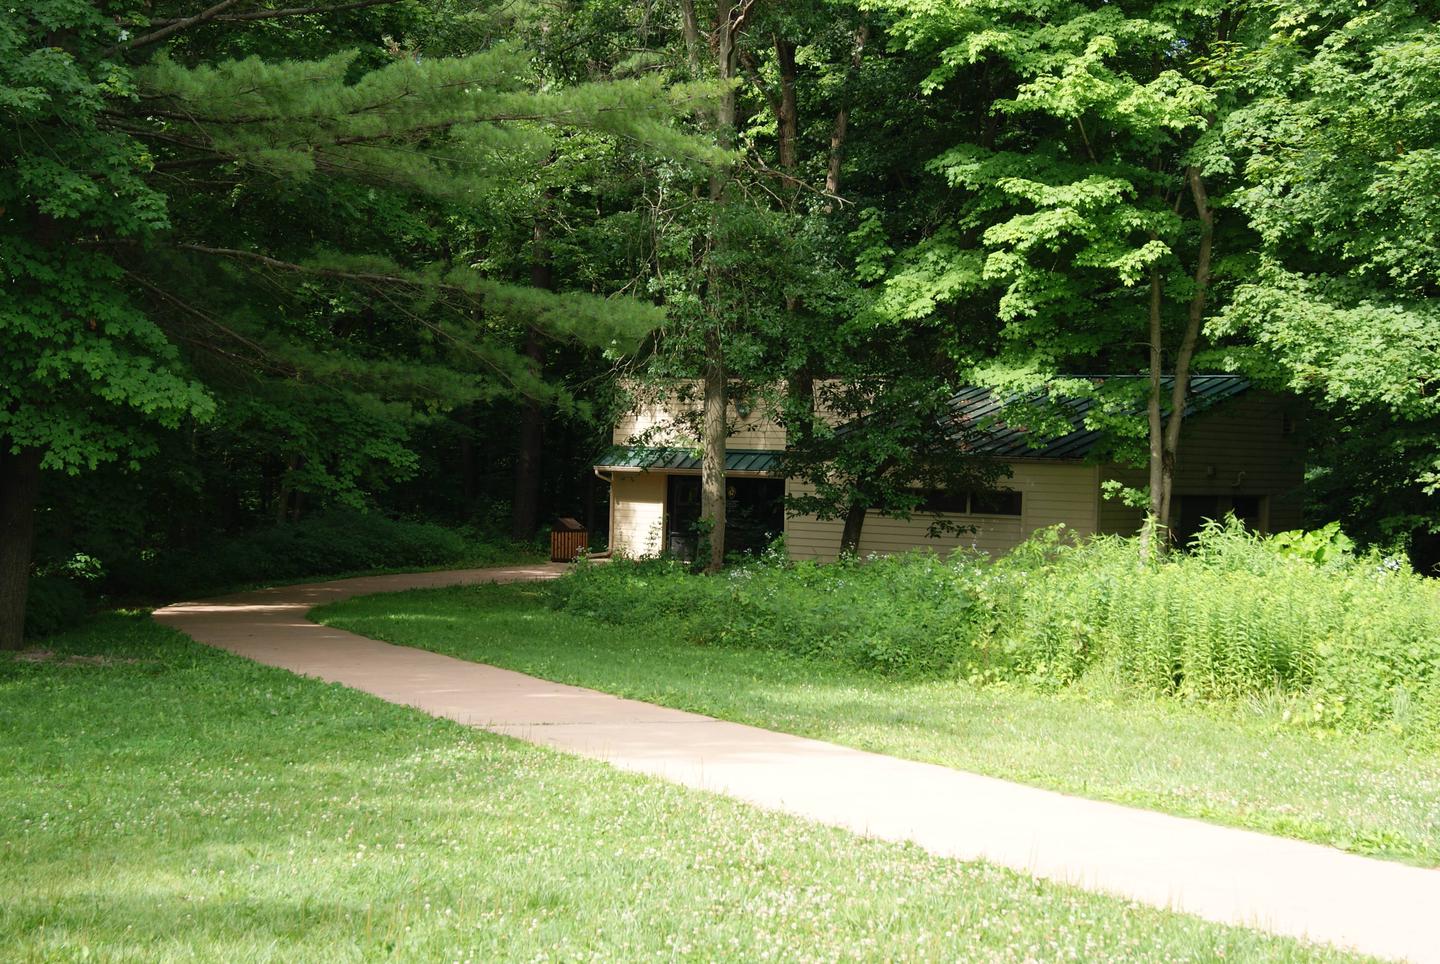 Bathroom for Picnic shelters at Chellberg Farm